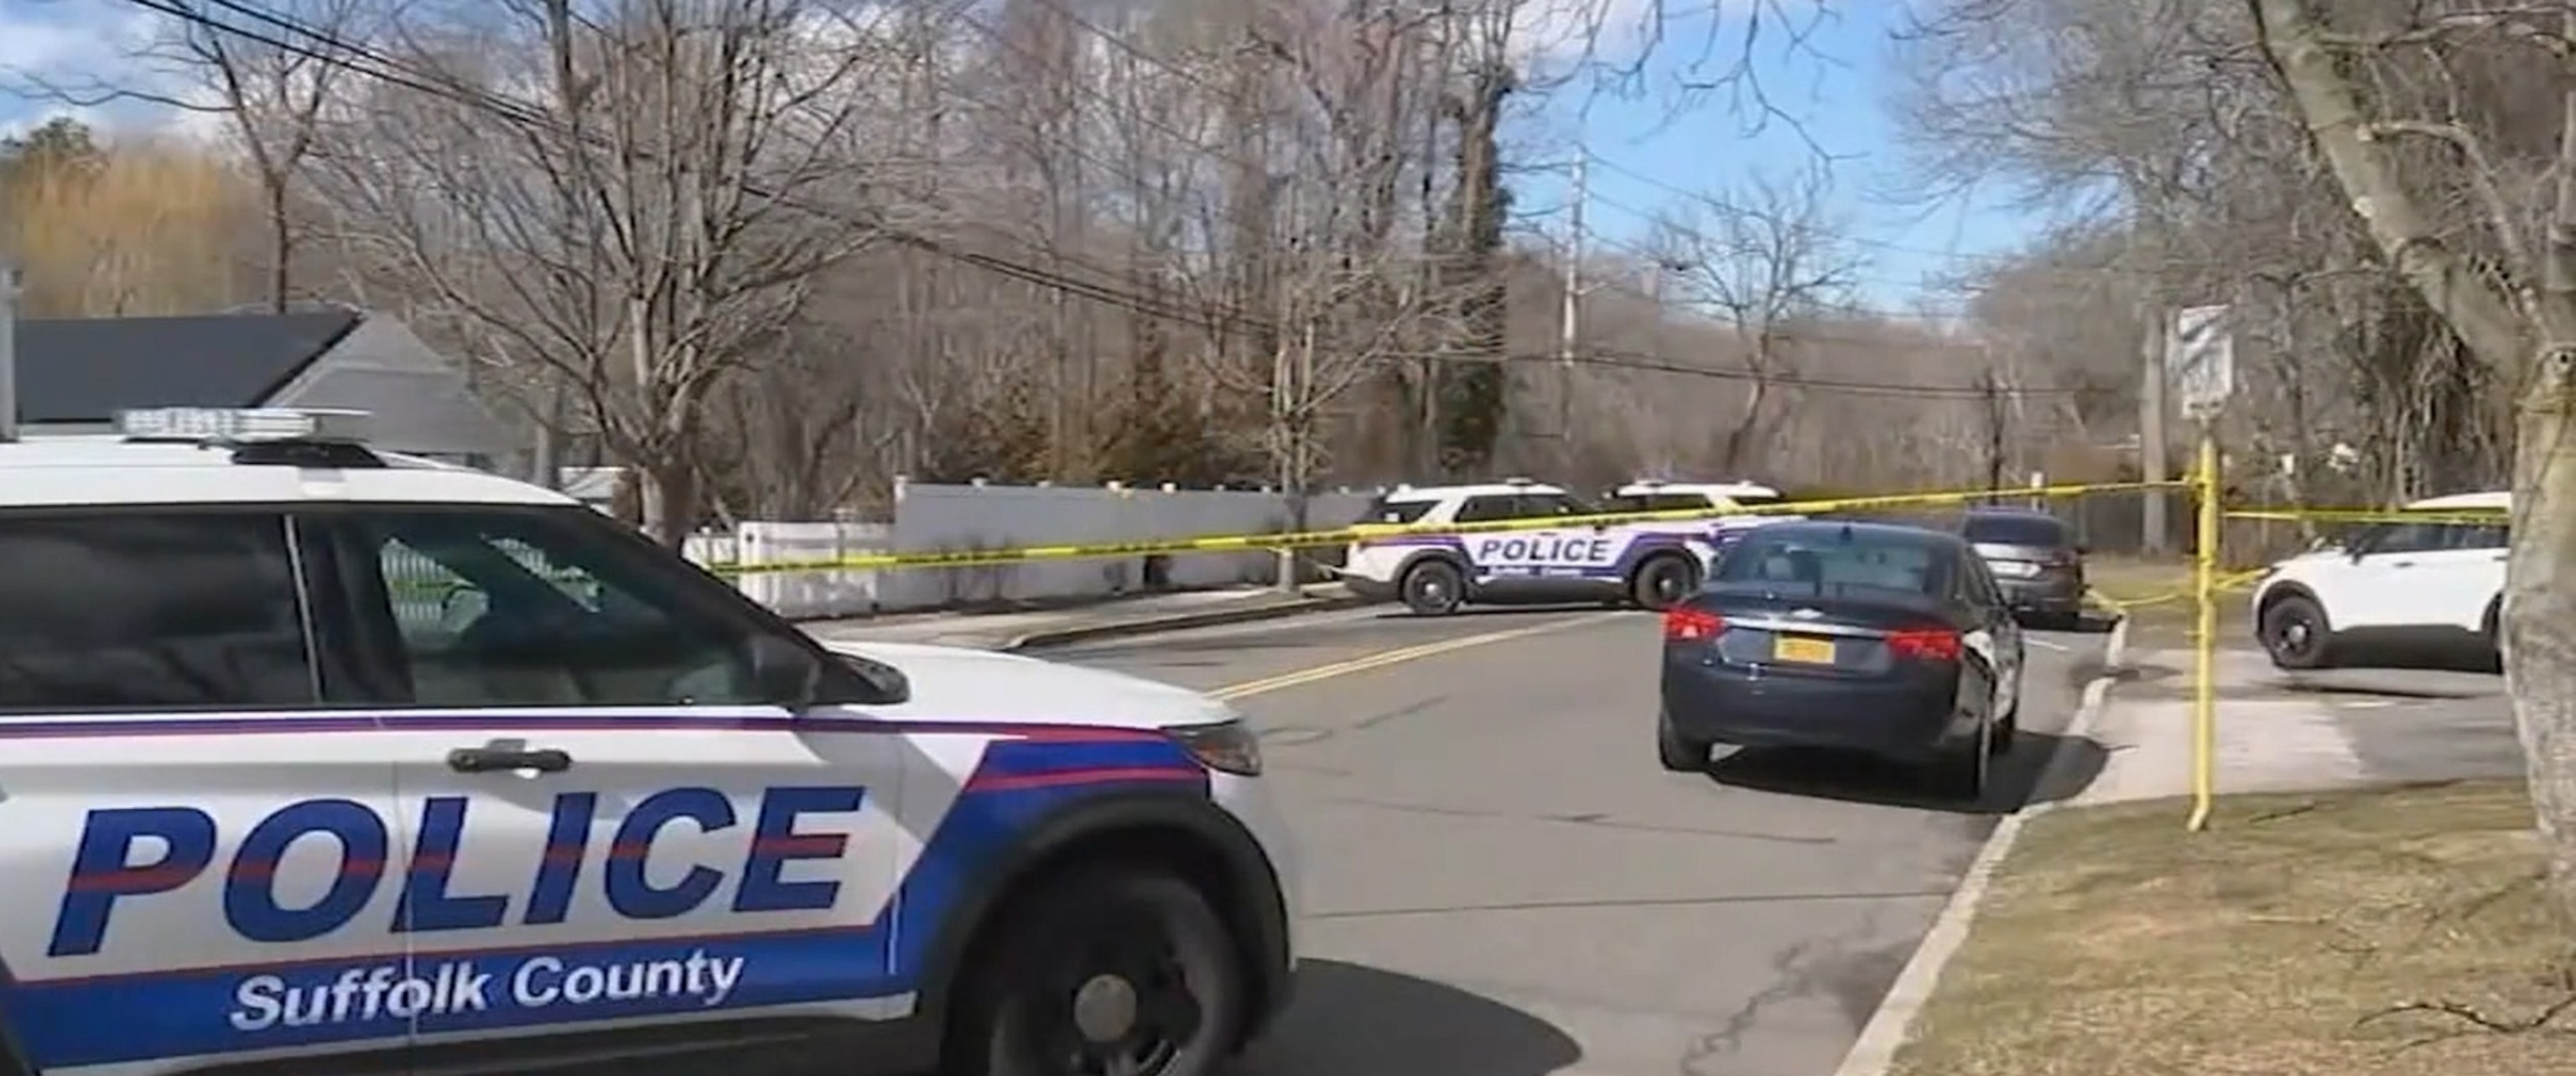 PHOTO: Police are shown on the scene in Suffolk County, New York, in connection to the discovery of body parts last week, on March 5, 2024.